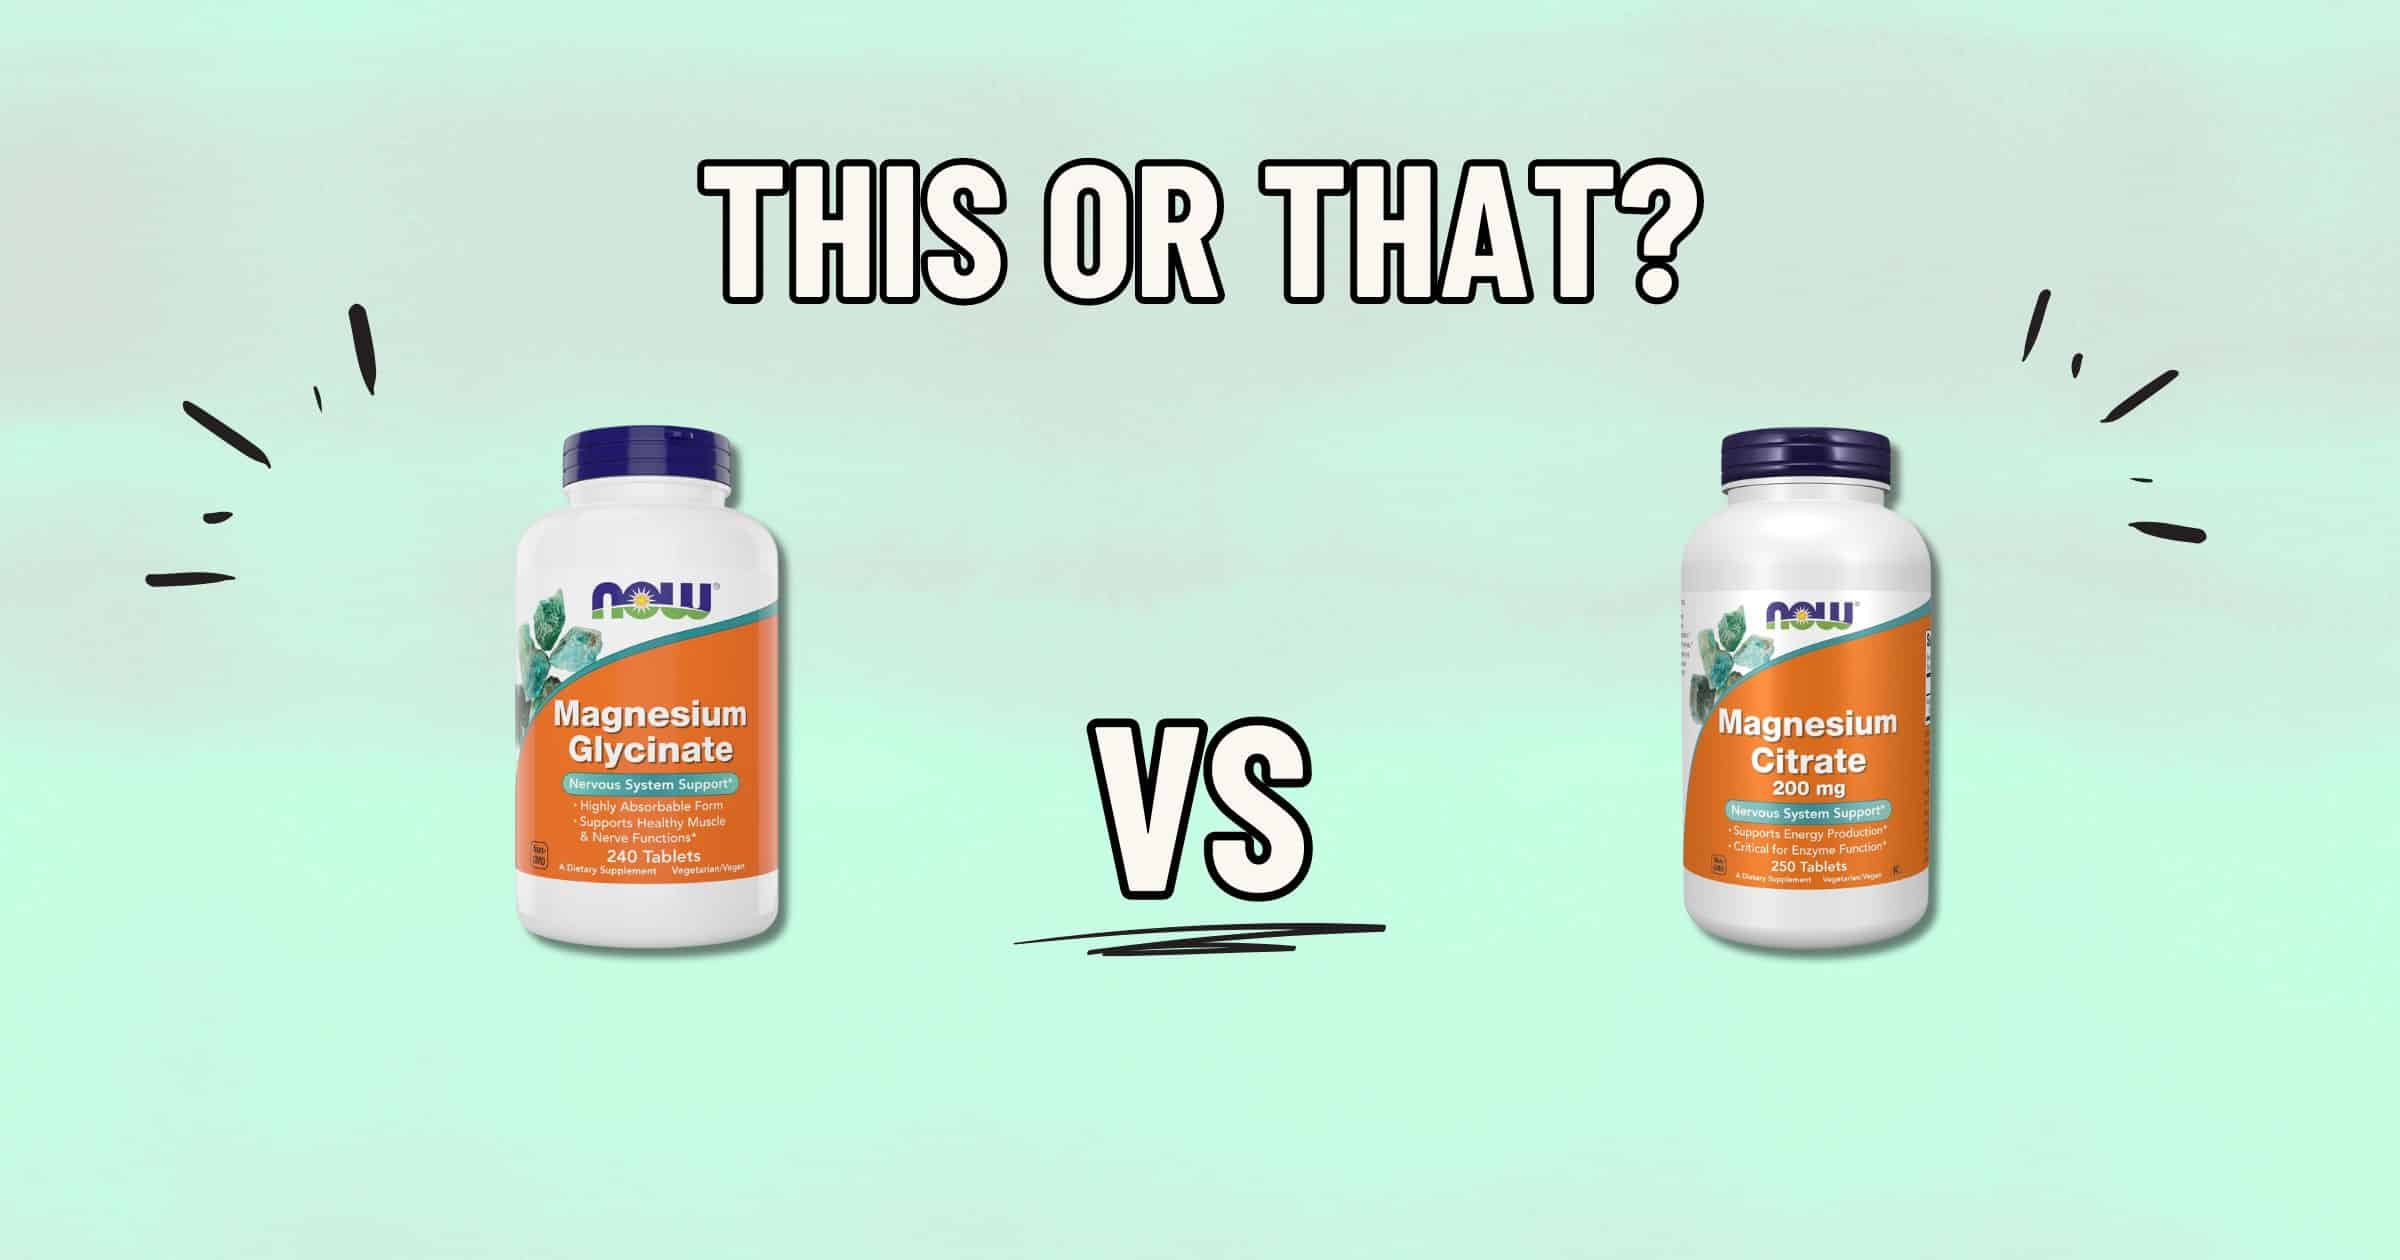 Two supplement bottles against a light green background: the one on the left labeled "NOW Magnesium Glycinate" and the one on the right labeled "NOW Magnesium Citrate." The text "THIS OR THAT?" is above, with "VS" between them. Which is the healthier choice for you?